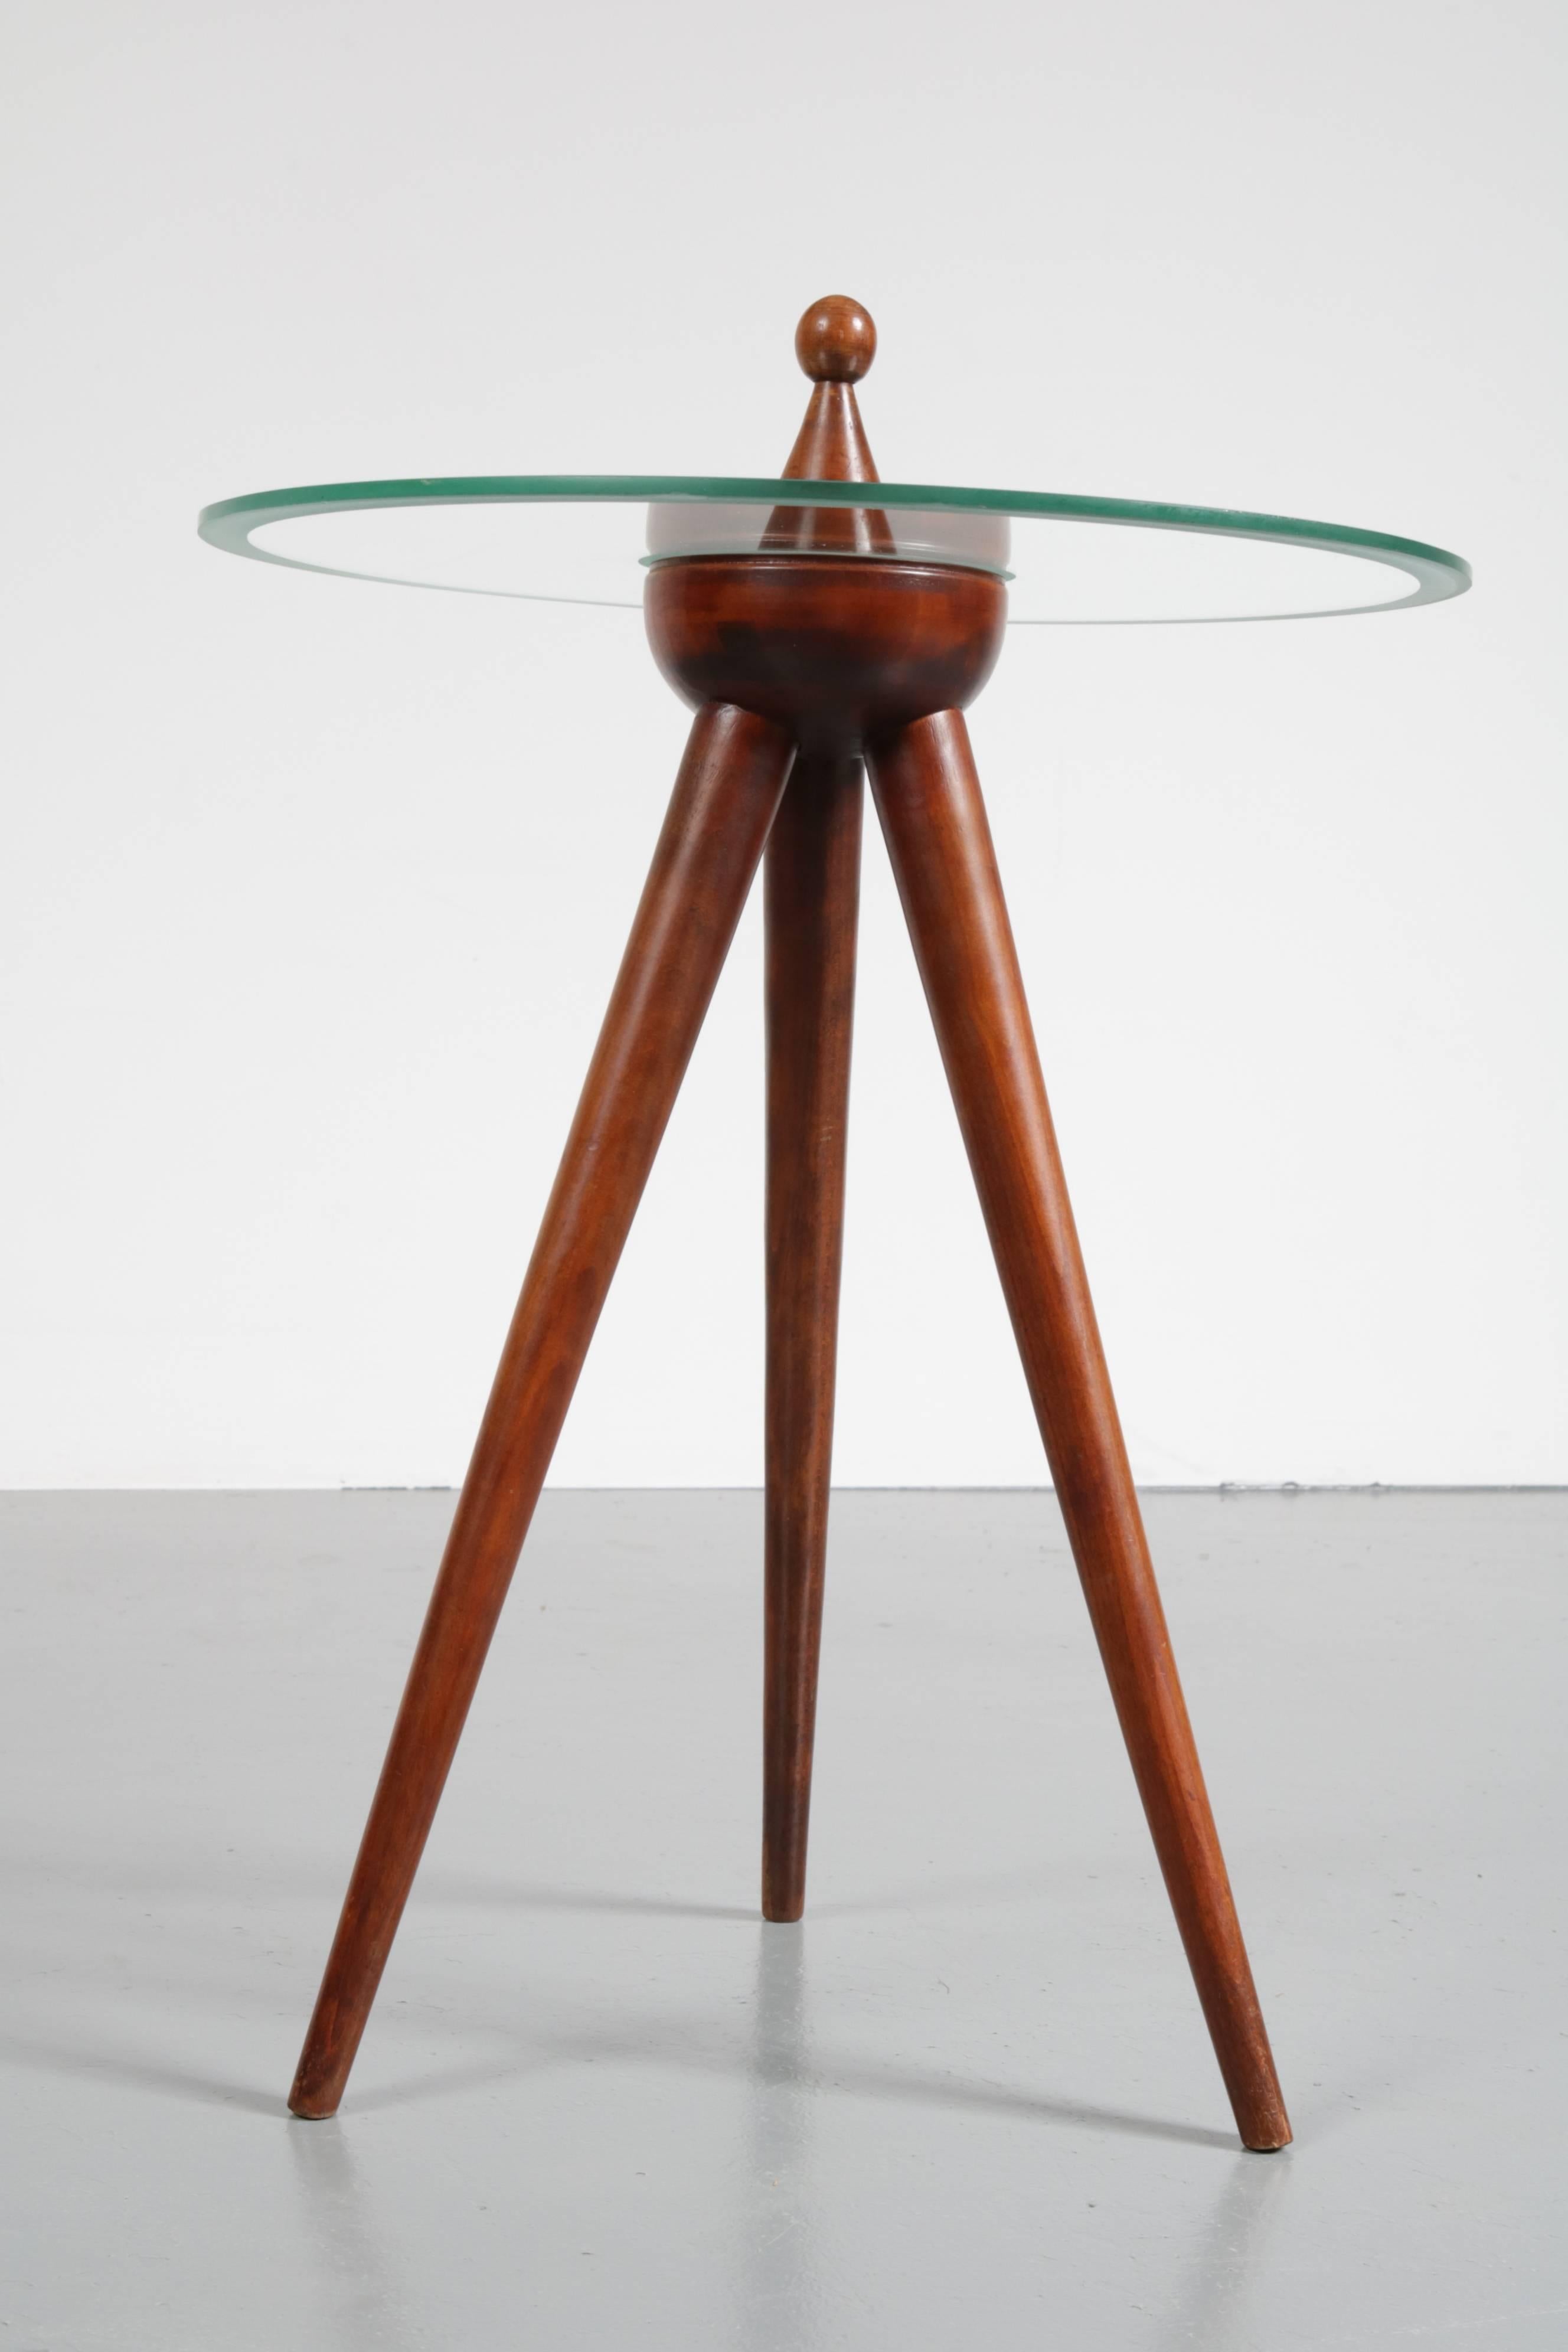 An elegant tripod side table made in Italy, circa 1950.

This rare find is made of high quality walnut wood with a round glass top. The edges of the top are beautifuly etched, creating an extra dimension to it's appearance. The tripod base is